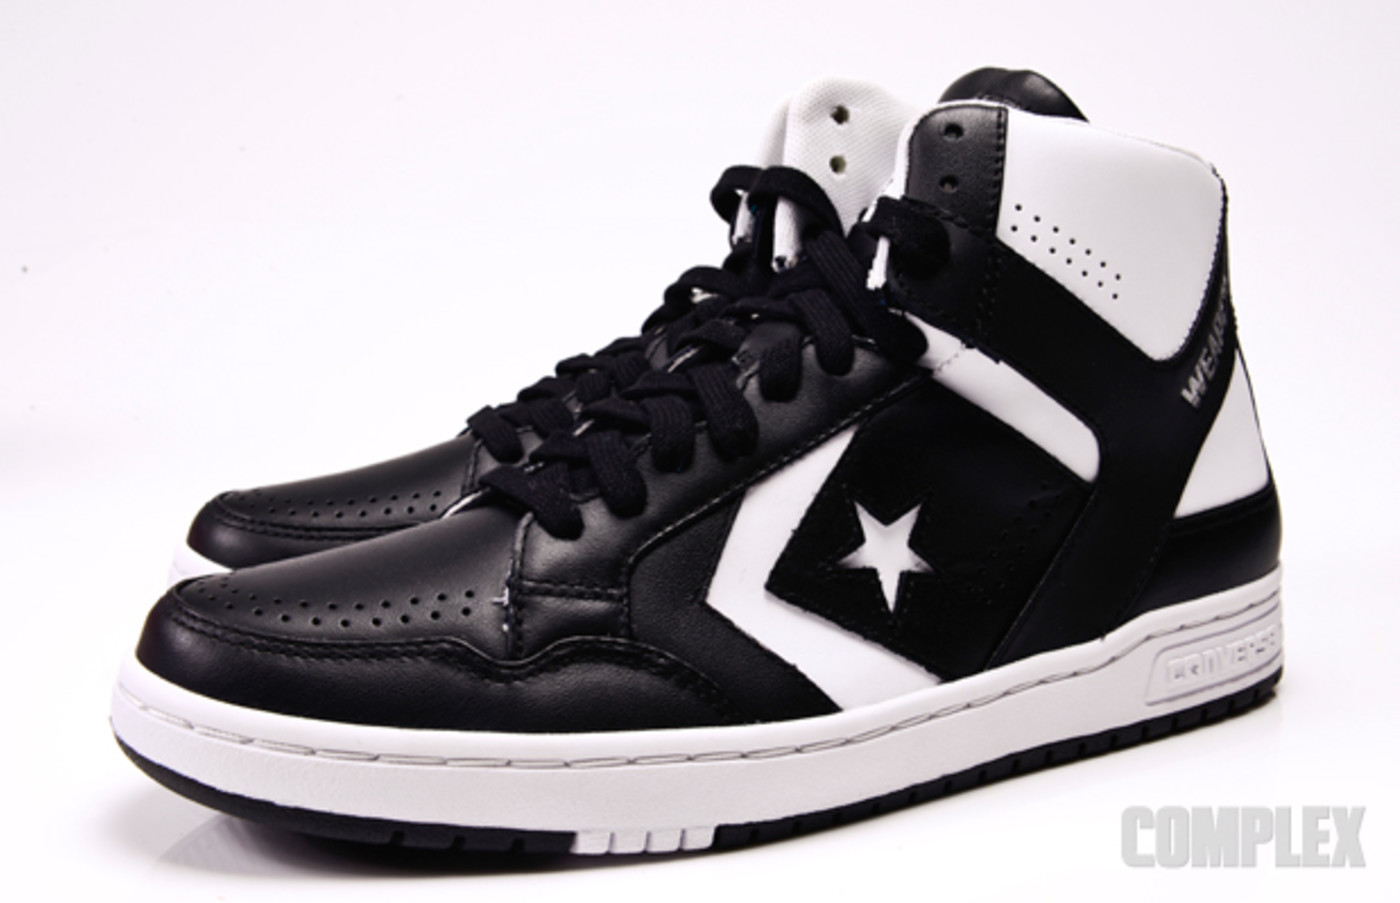 converse weapon review